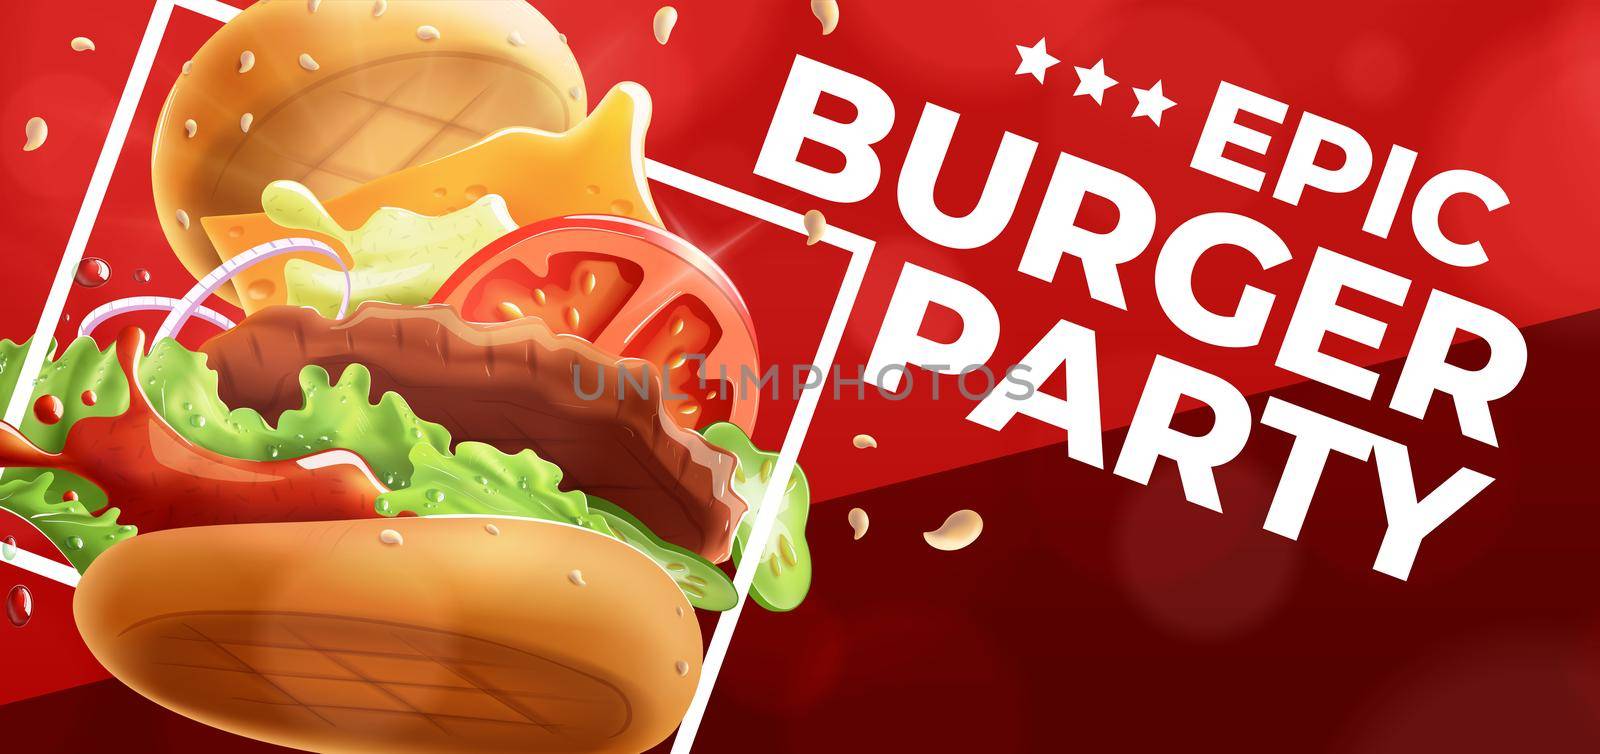 Epic Burger Party Flyer Template